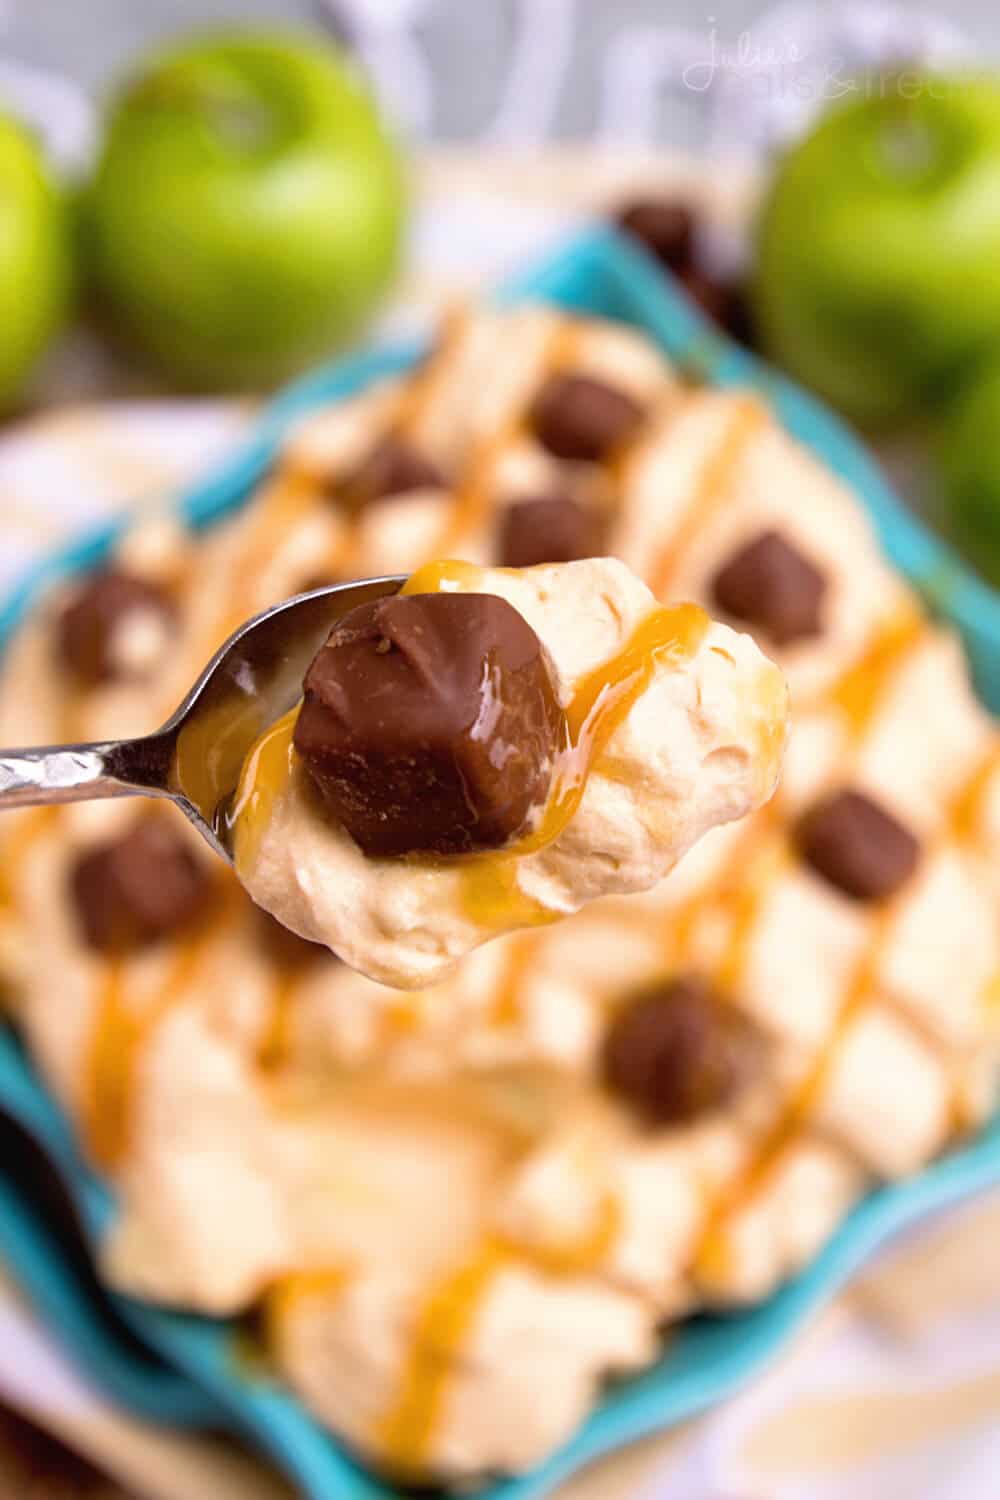 Caramel Apple Snickers Salad Recipe ~ Quick, Delicious, Fluffy Salad Recipe! Eat it for Dessert or a Side Dish! Loaded with Apples, Snickers and Drizzled with Caramel!